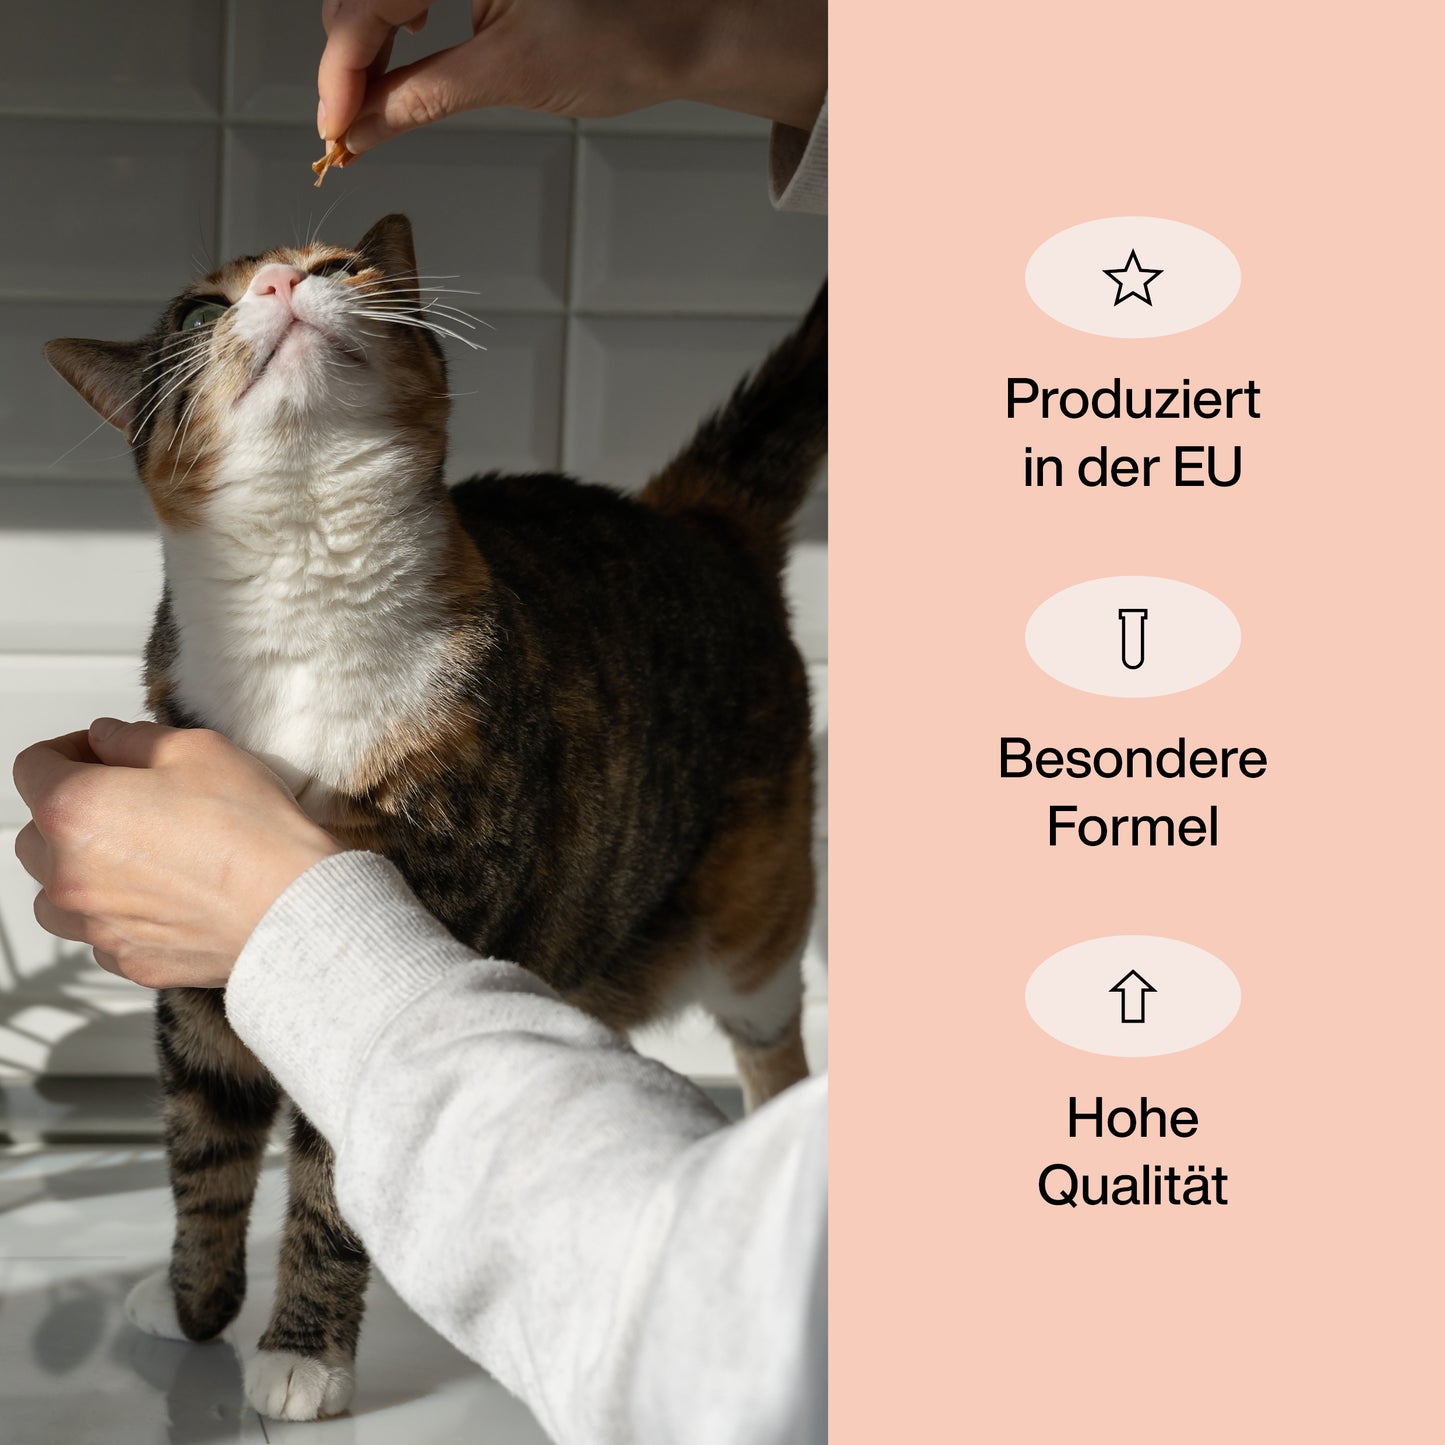 Vitamins for cats "HAIR & SKIN"